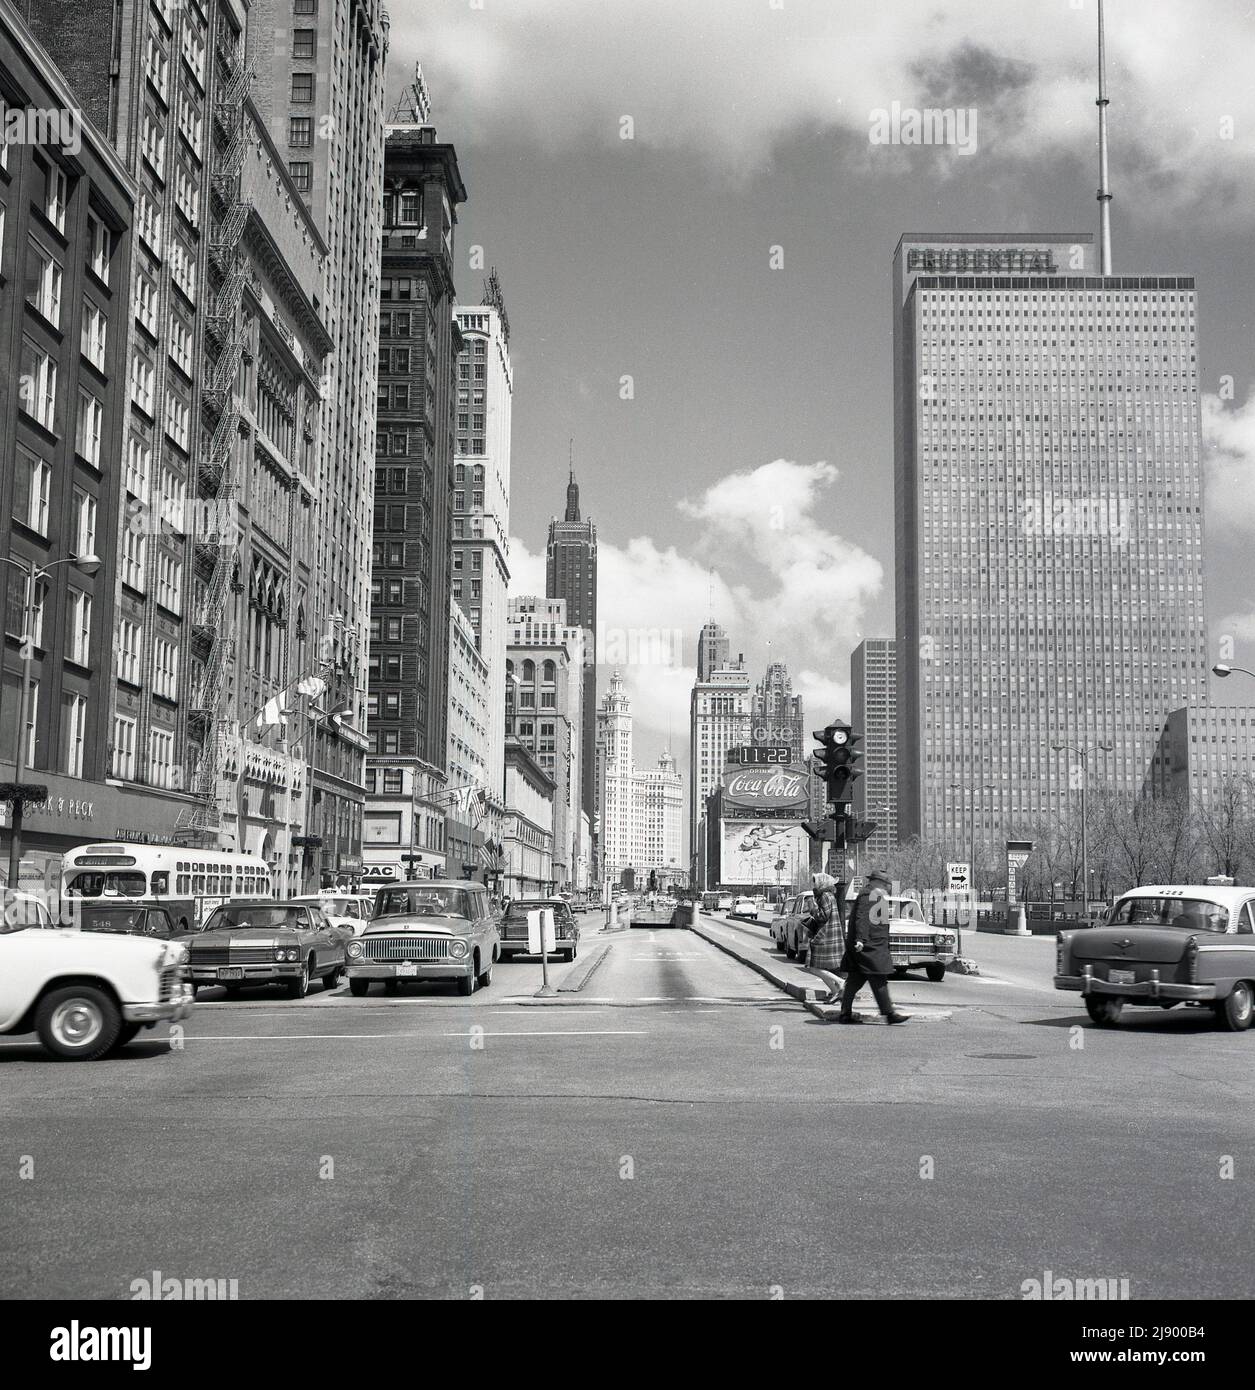 1960s, historical picture by J Allan Cash of N. Michigan Ave, Chicago, USA, showing the Maremont Bldg, Prudential office block and American automobiles of the era. The mid-American headquarters of the US Insurance company Prudential was a 41-story building completed in 1955, and its significance is that it was the first skyscraper built in Chicago since the 1930s Great Depression and the Second World War. The exit and entrance of the underground parking at the Grant Park (South) Garage, a giant municipal parking space with three levels and 1,800 spaces. Stock Photo